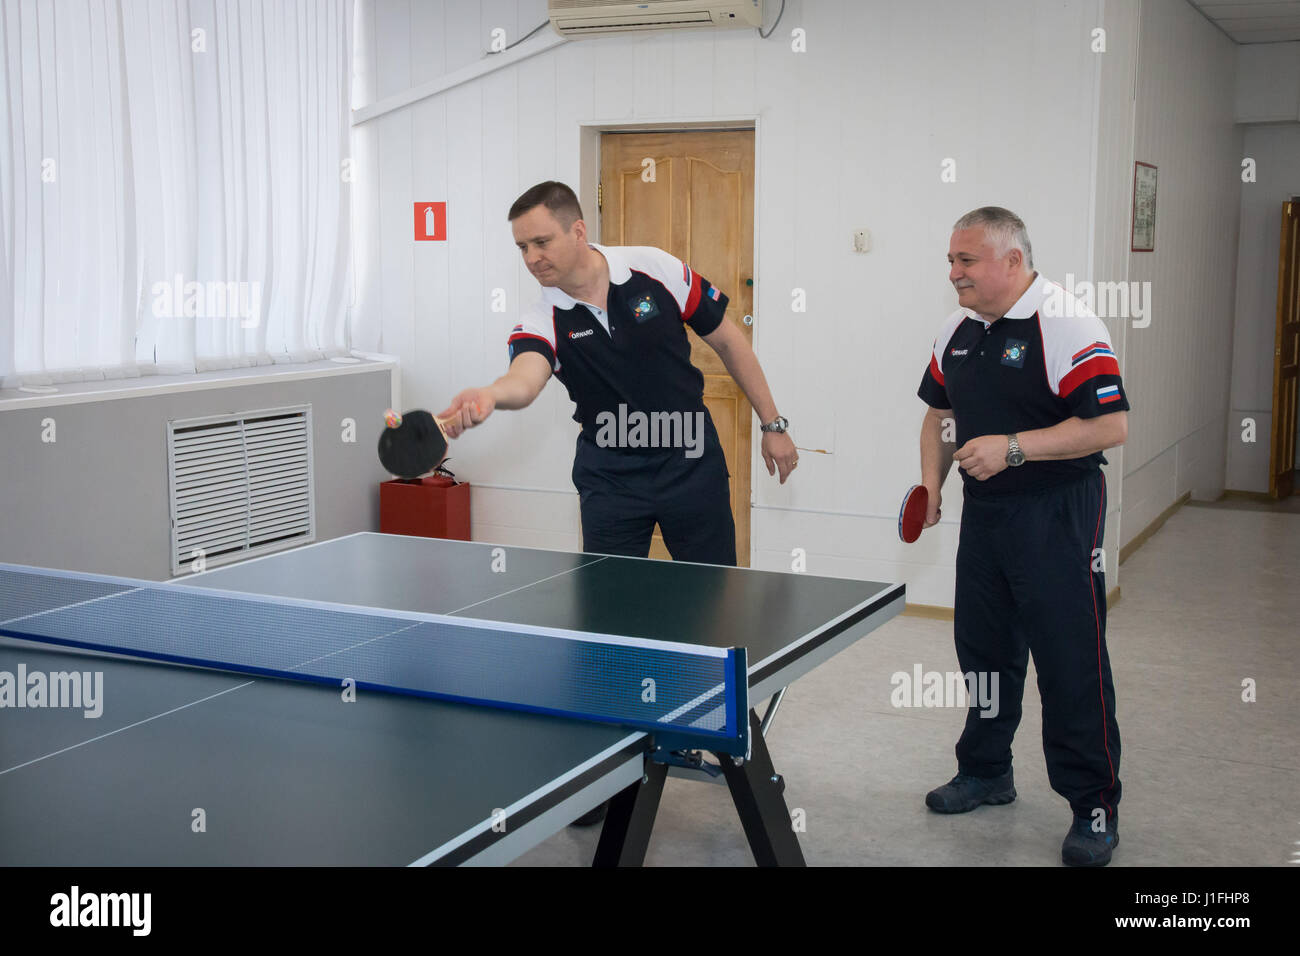 NASA International Space Station Expedition 51 Soyuz MS-04 mission prime  crew members American astronaut Jack Fischer (left) and Russian cosmonaut  Fyodor Yurchikhin of Roscosmos play a game of ping-pong during pre-launch  activities